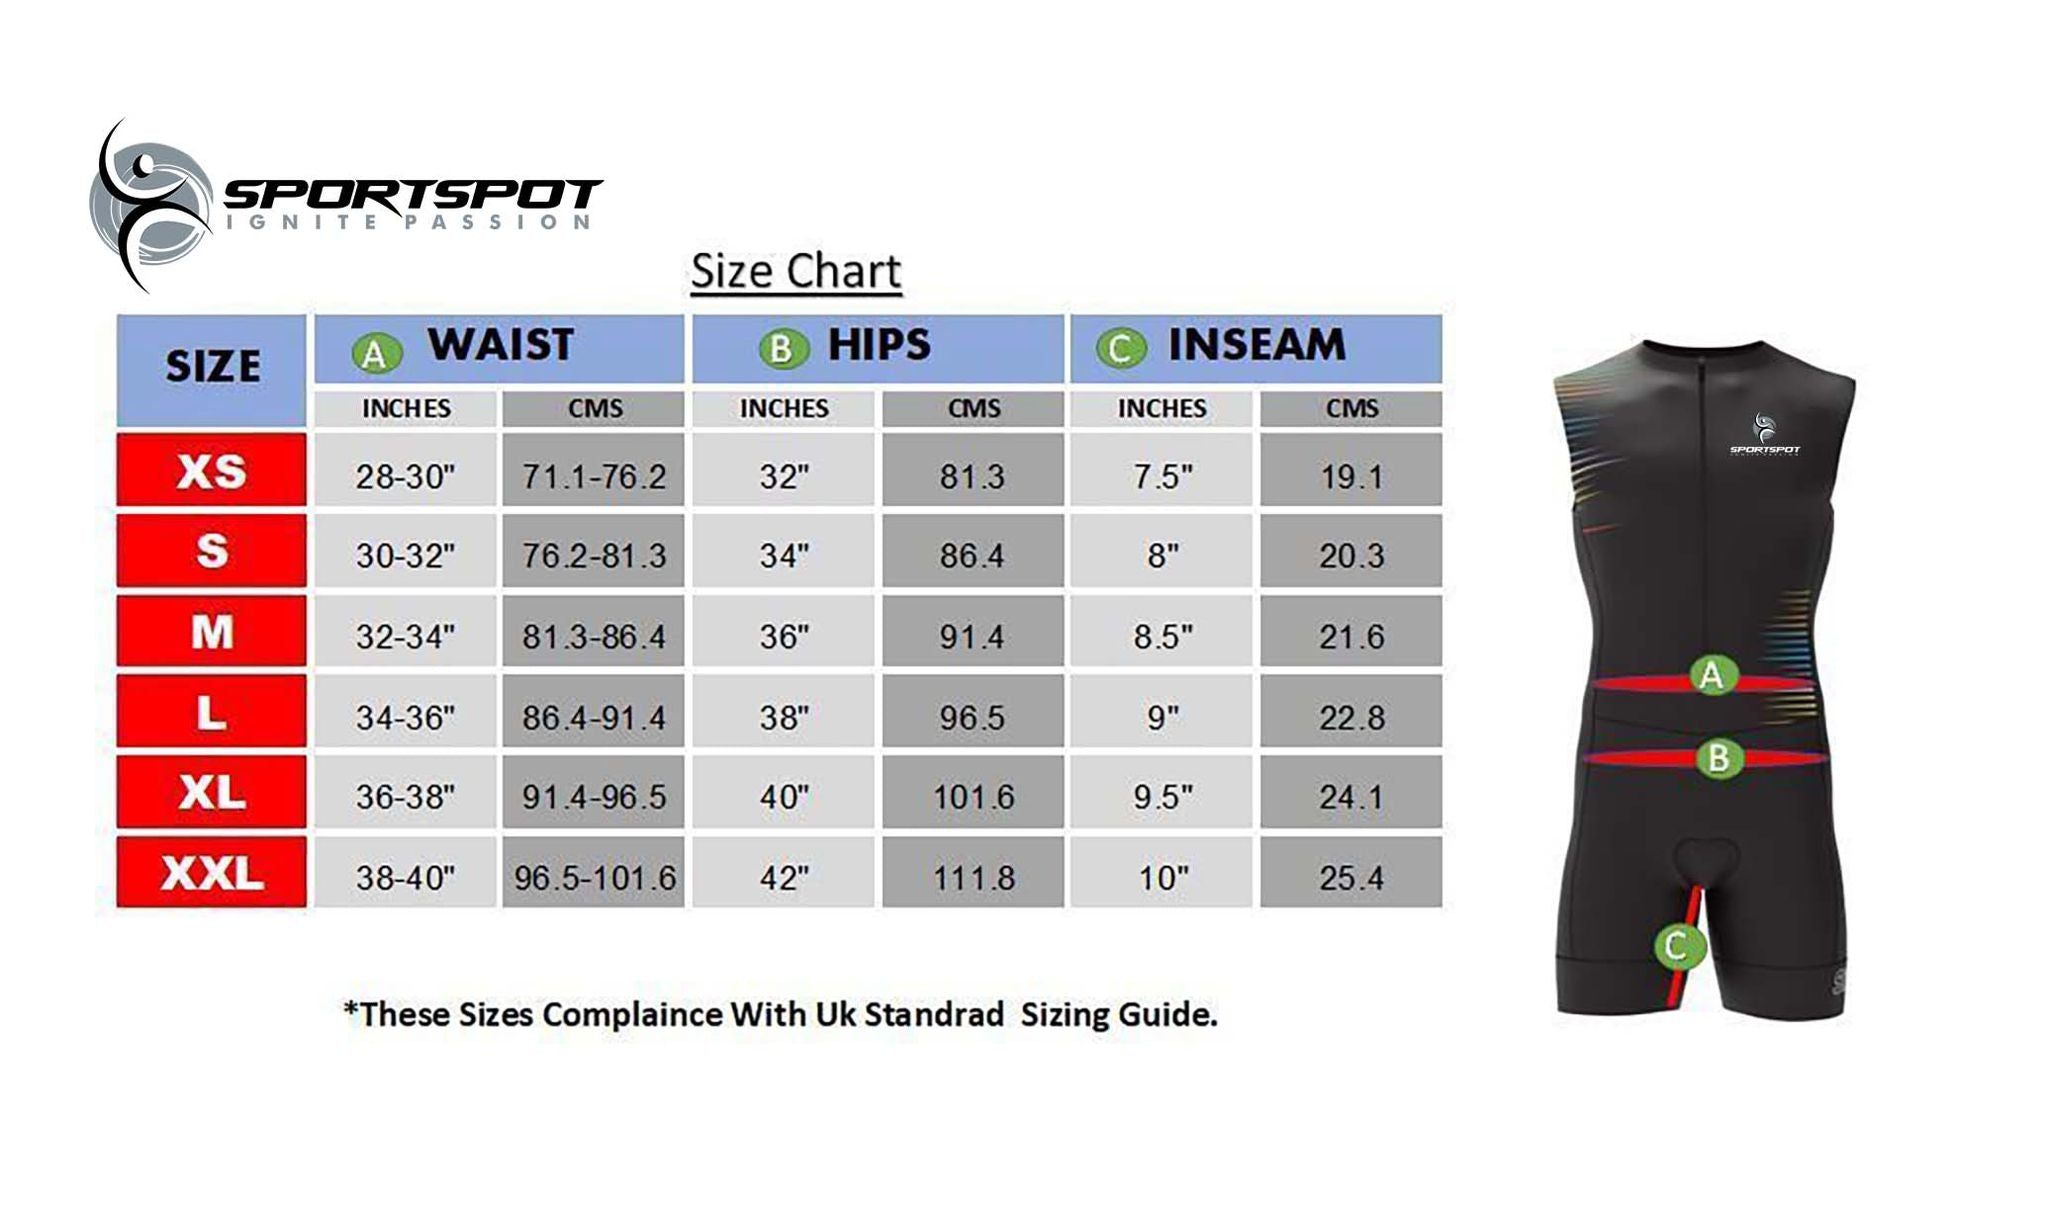 Men's Sleeveless Triathlon Compression Skinsuit for Cycling, Running, and Swimming with Gel Padding